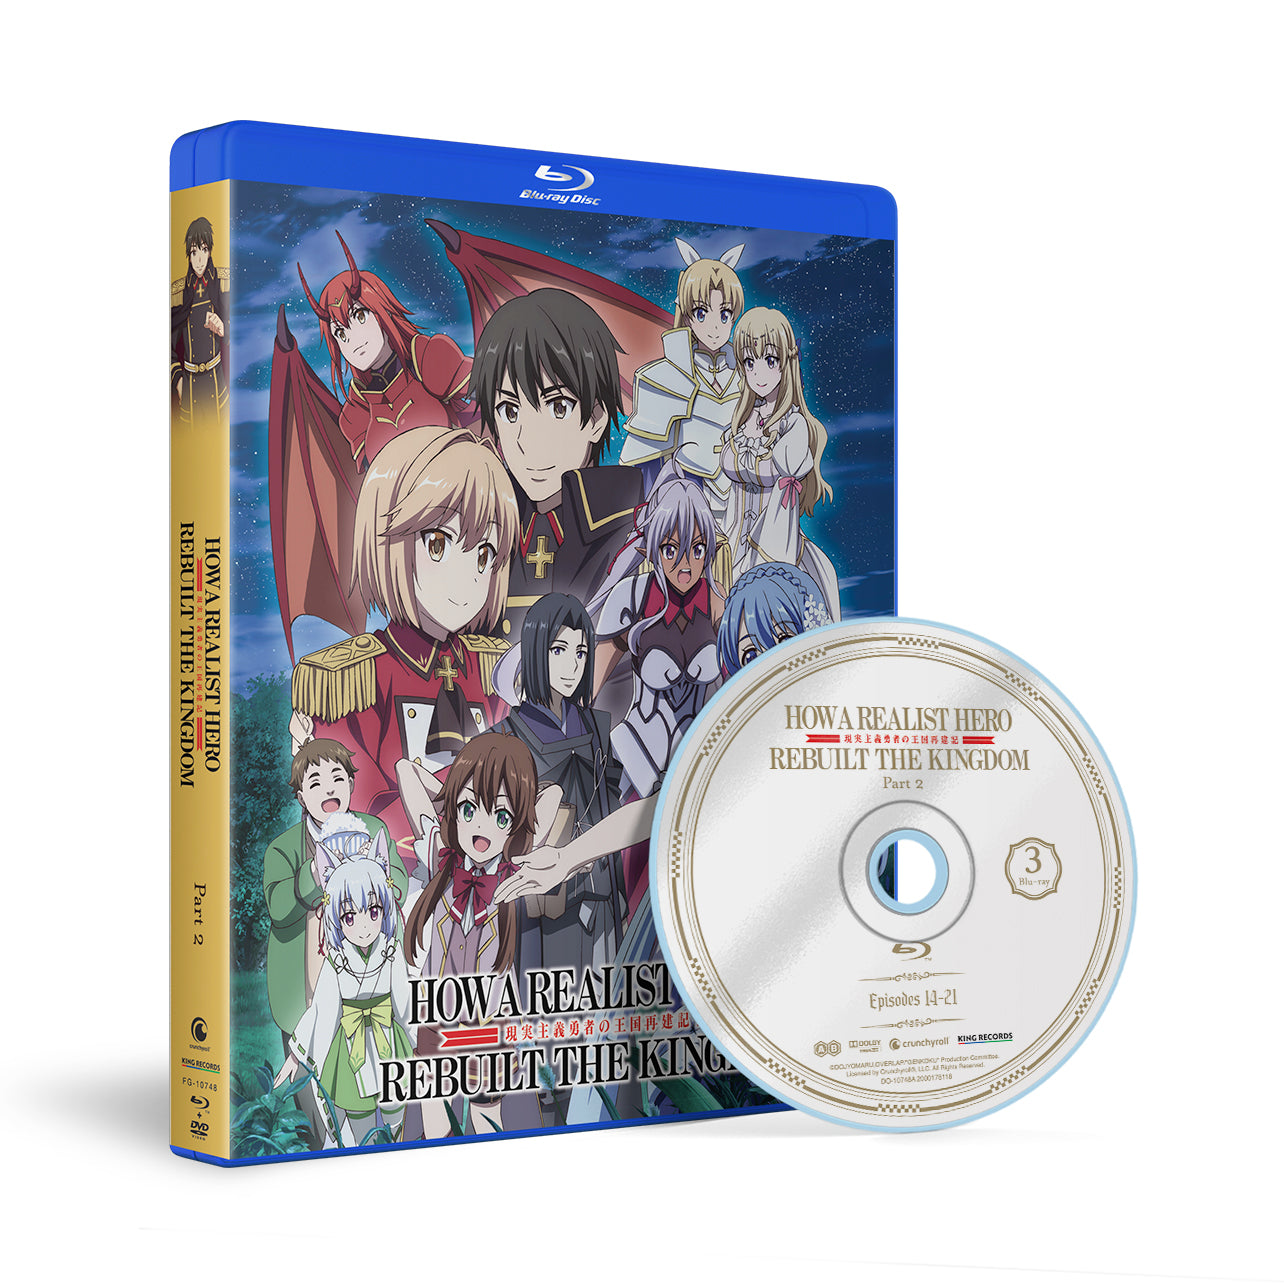 How a Realist Hero Rebuilt the Kingdom - Part 2 - BD/DVD image count 1